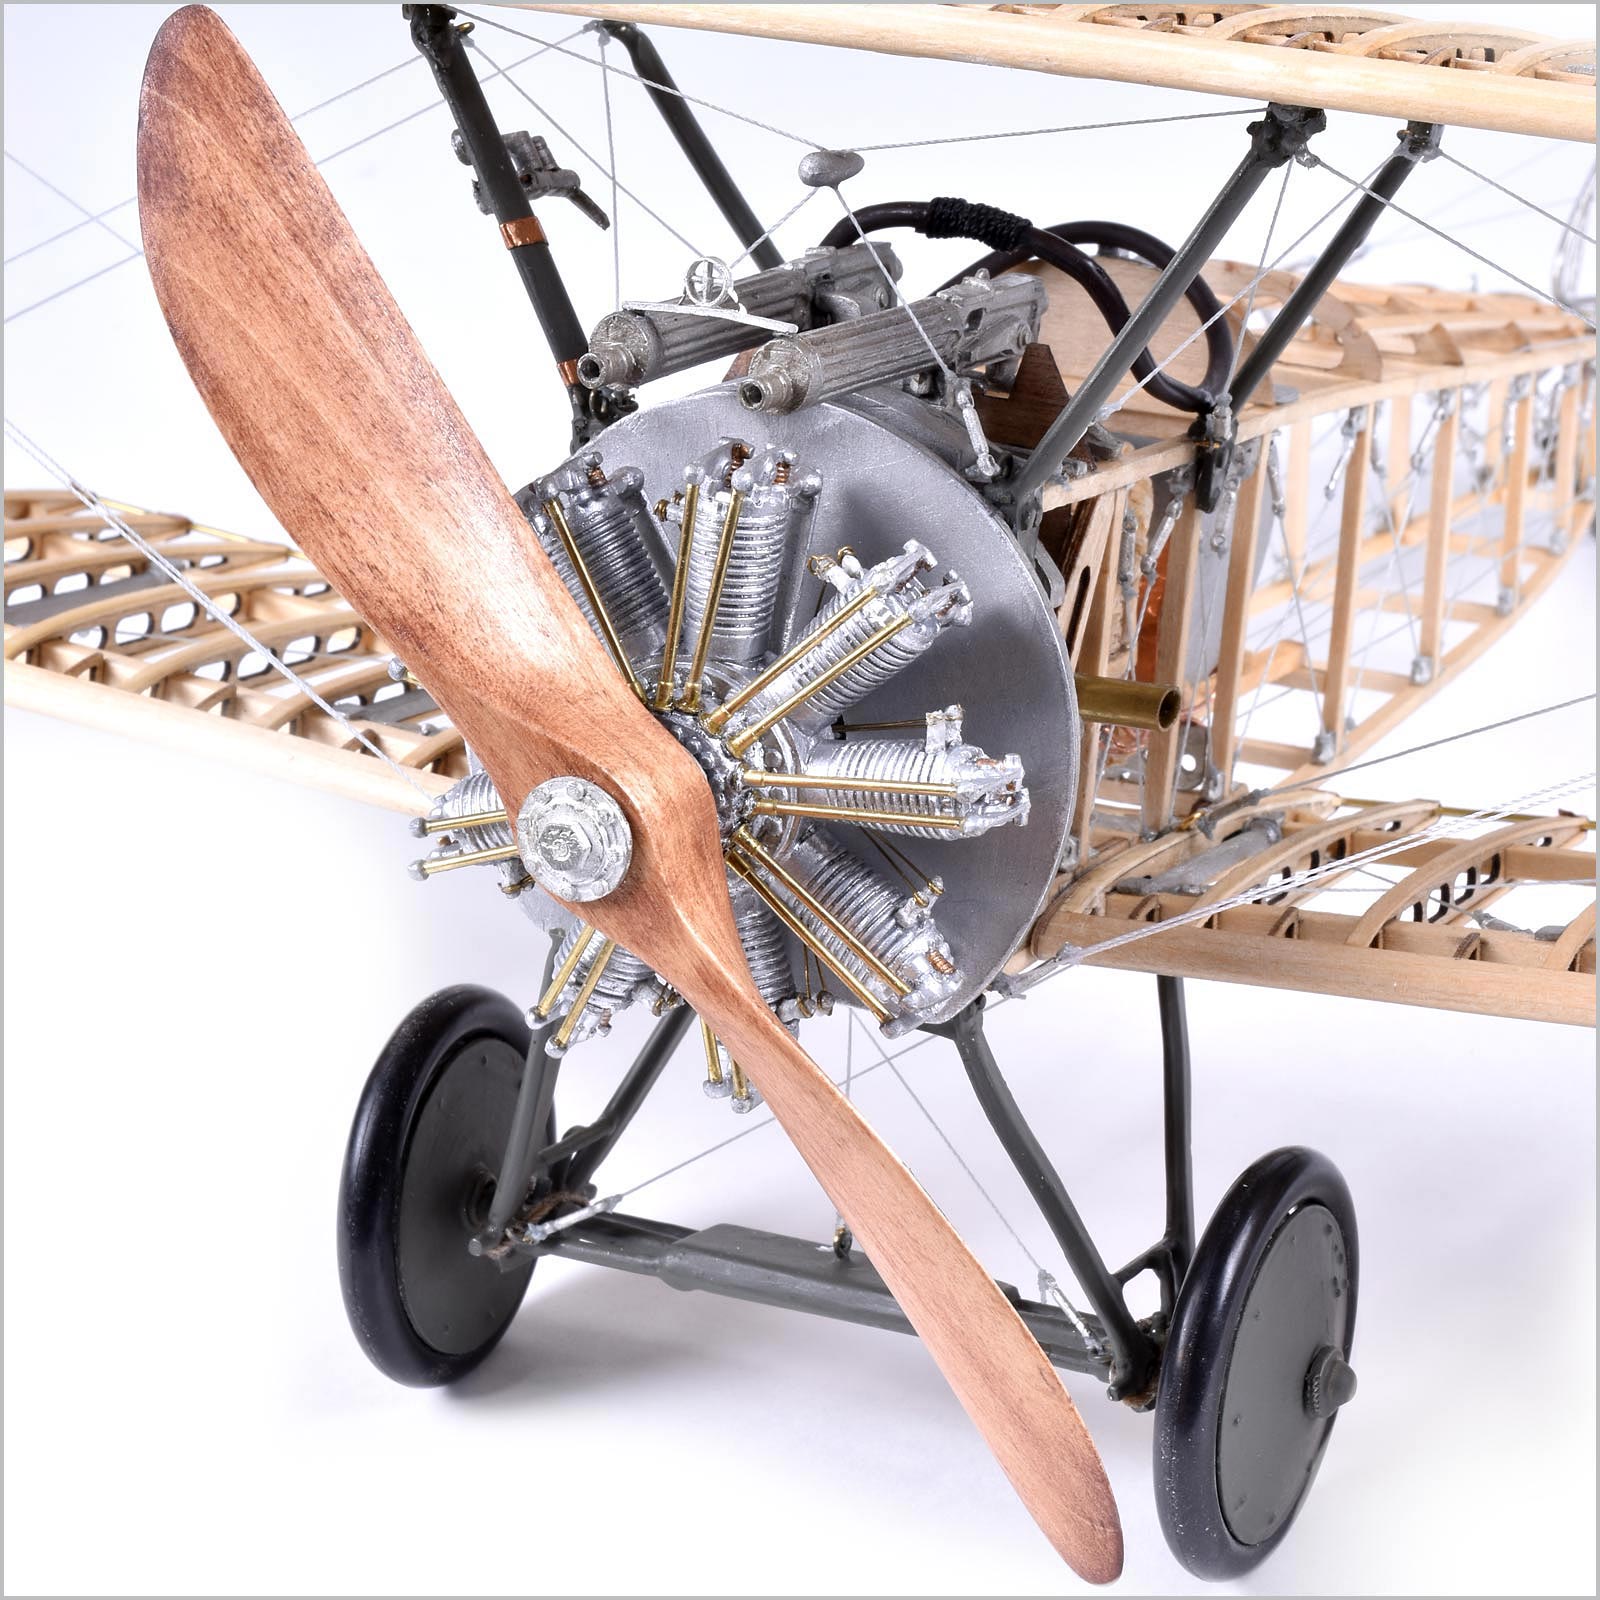 Model Airways Sopwith Camel, WWI British Fighter, 1:16 Scale - Micro - Mark Scale Model Kits